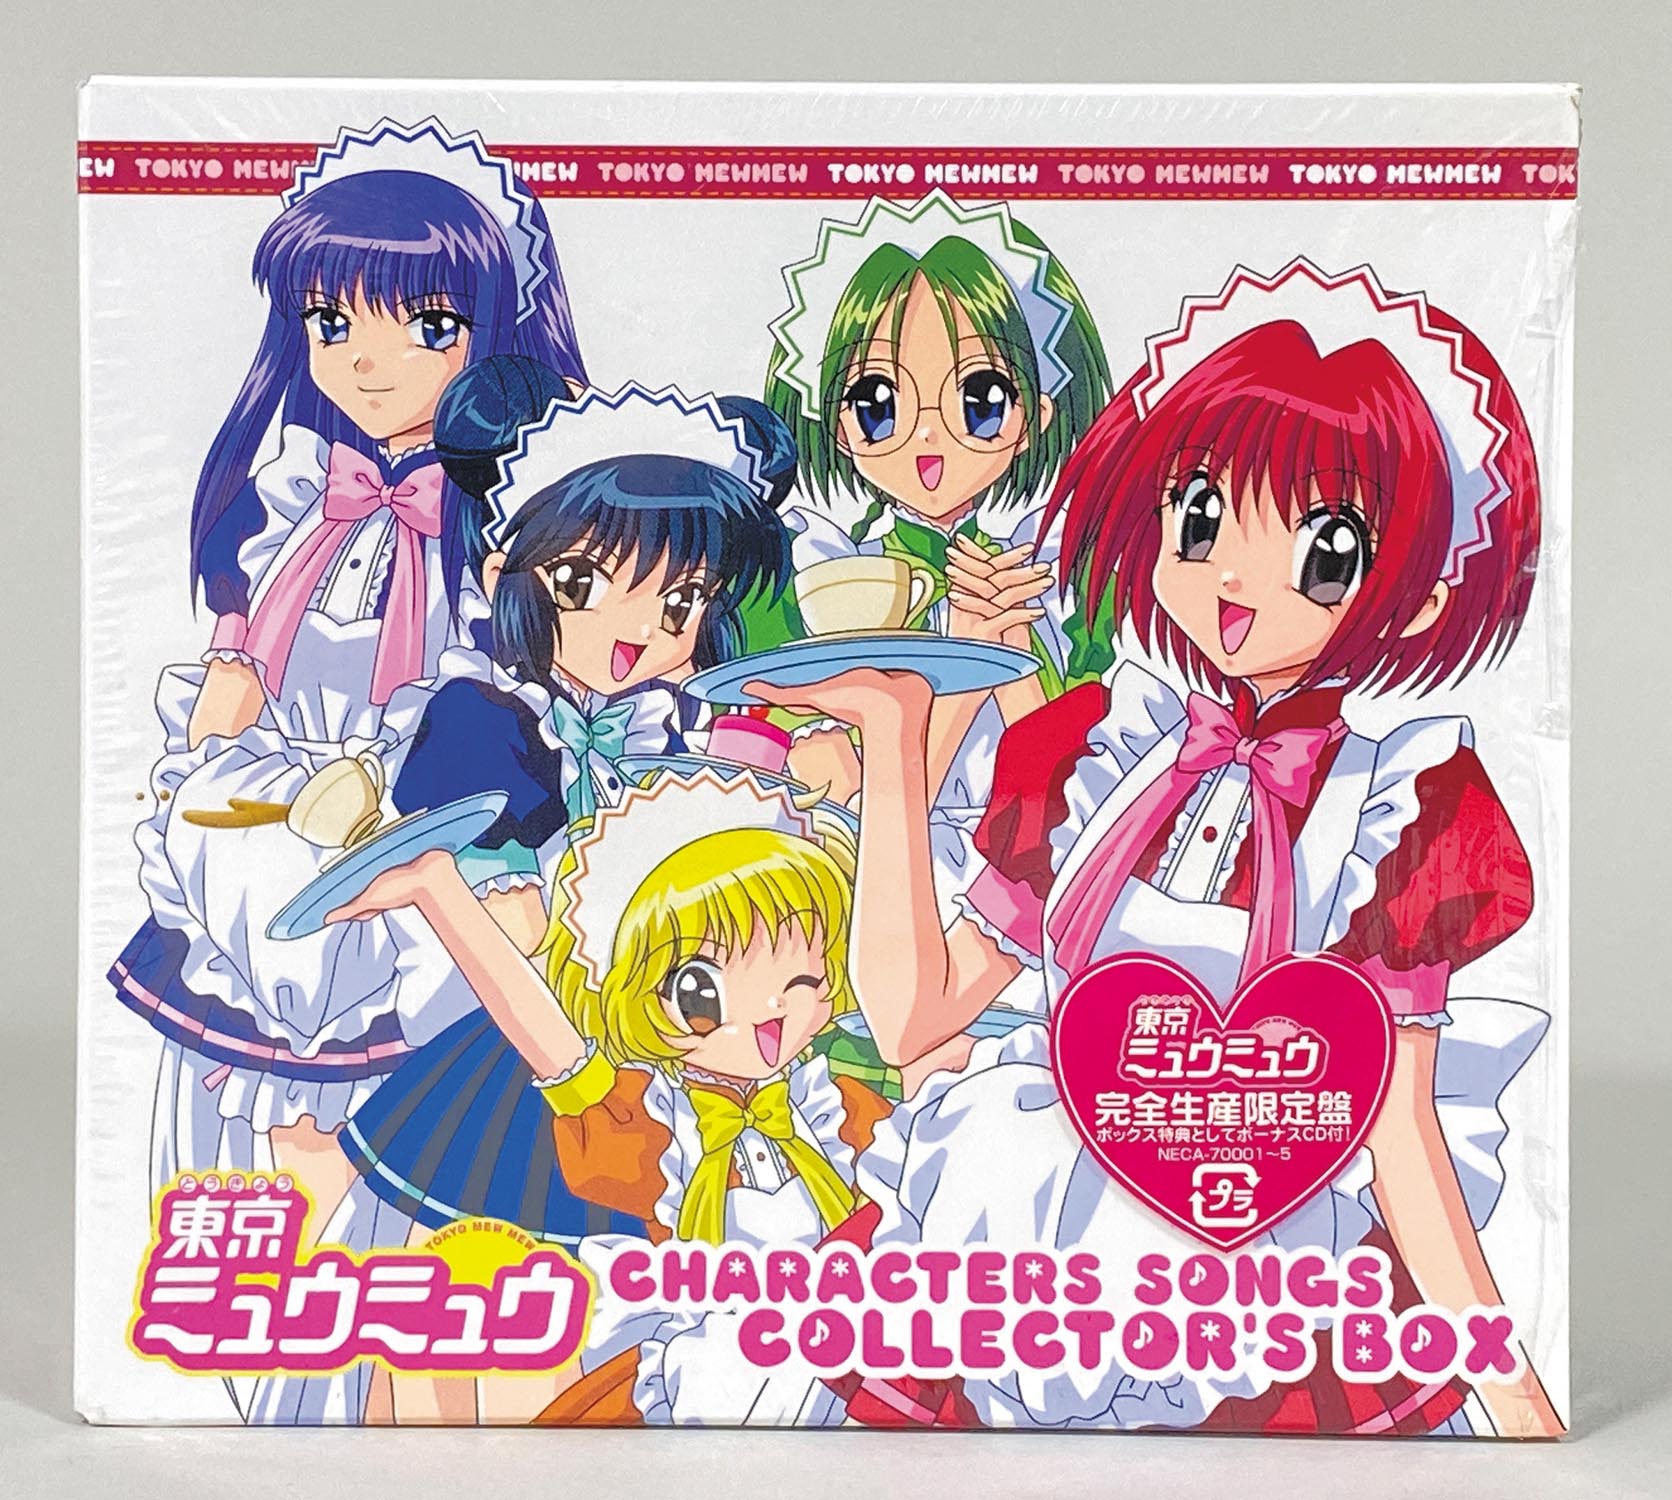 Tokyo Mew Mew Character Songs Collector's Box Limited Edition